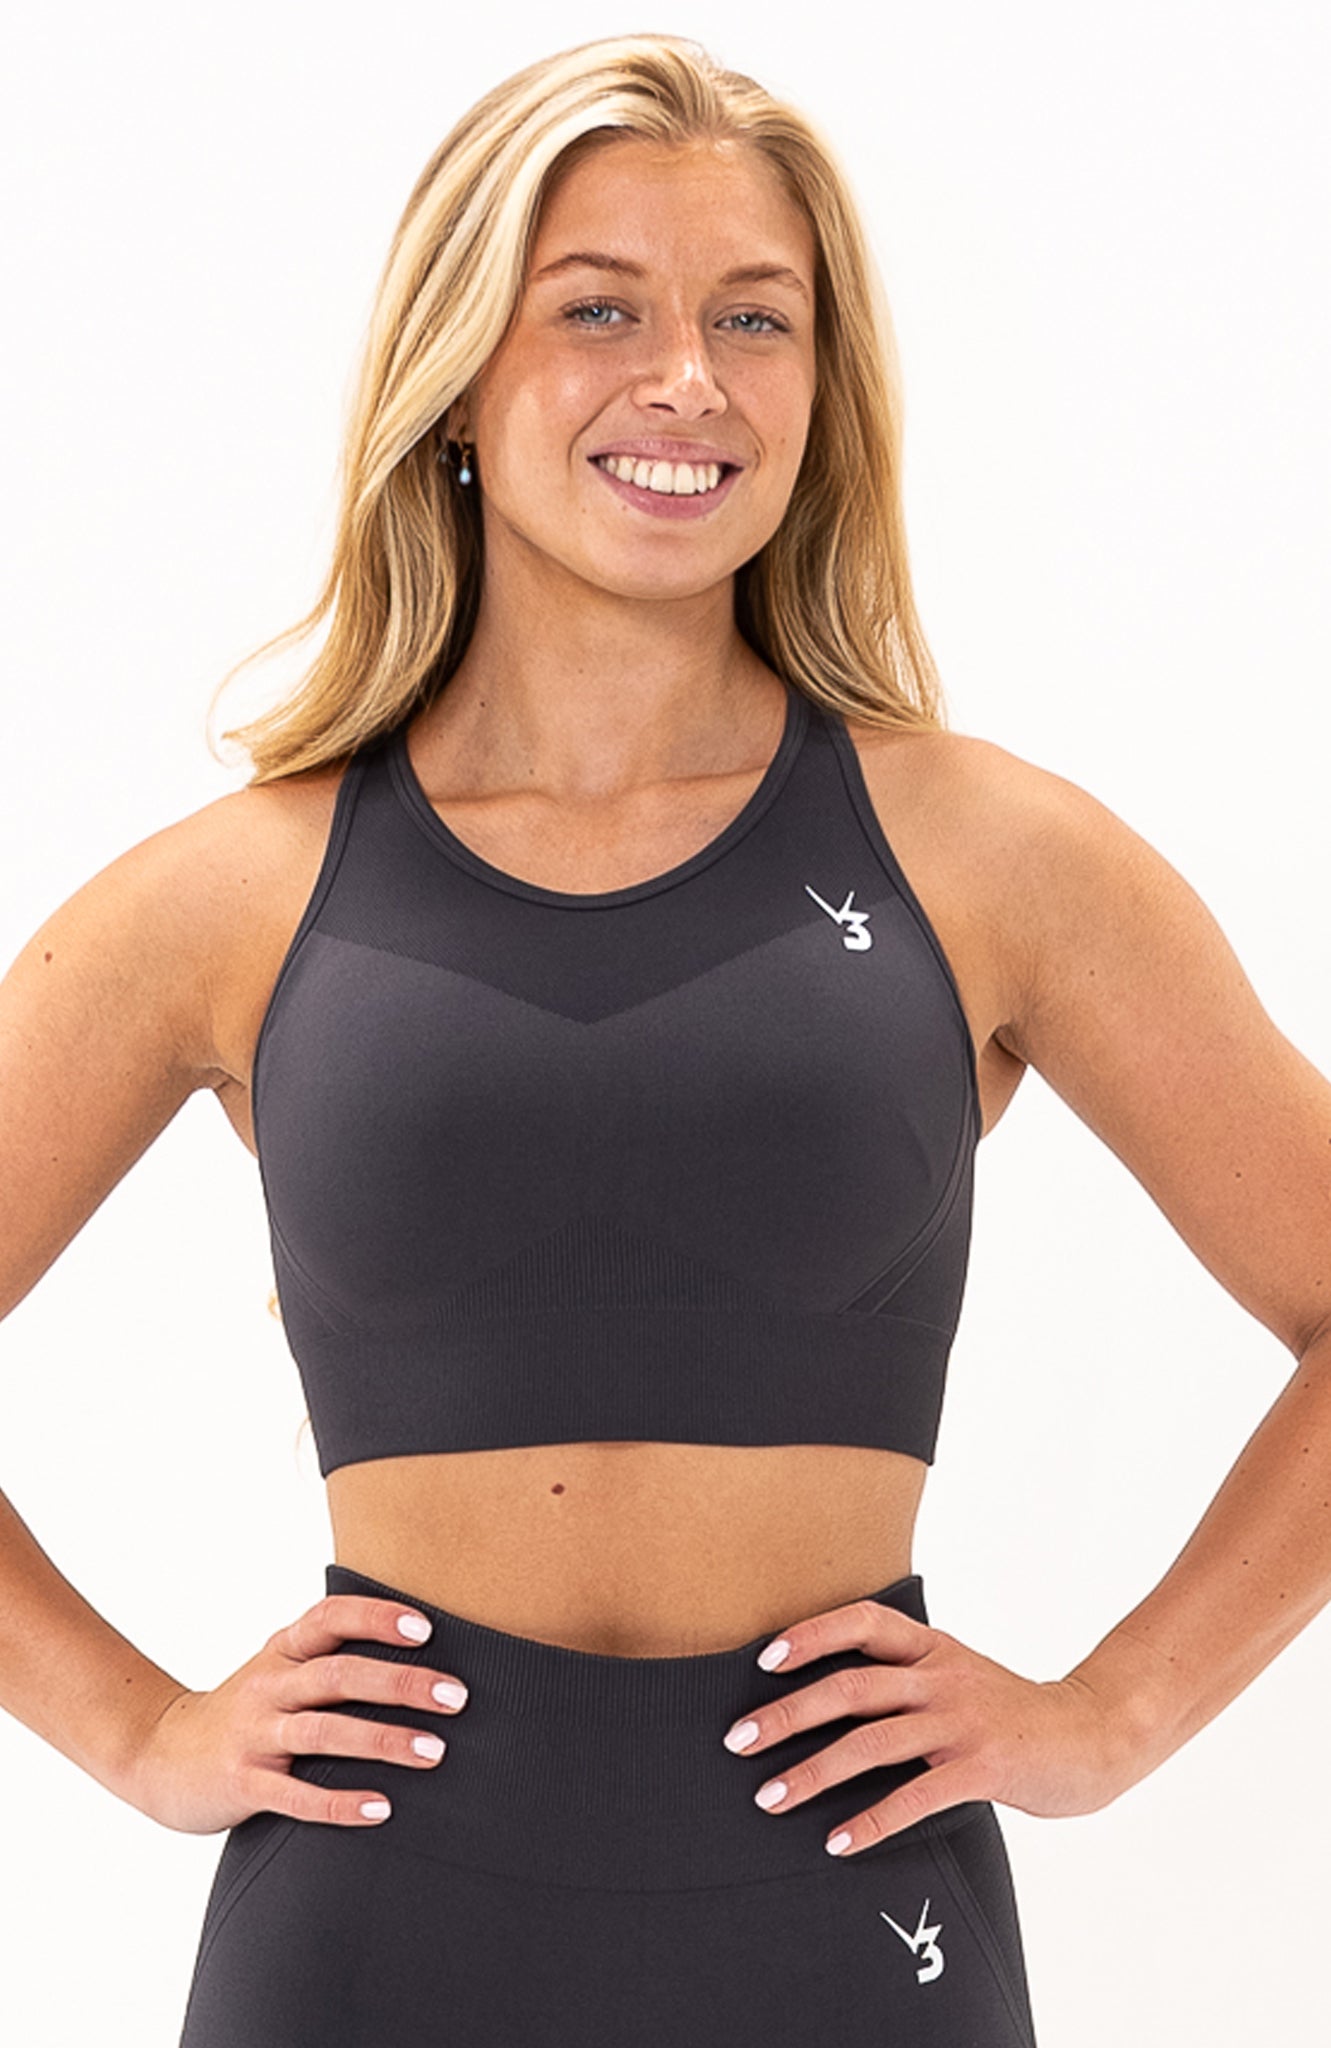 redbaysand Women's Tempo seamless training sports bra in charcoal grey with removable padded cups and straps for gym workouts training, Running, yoga, bodybuilding and bikini fitness.